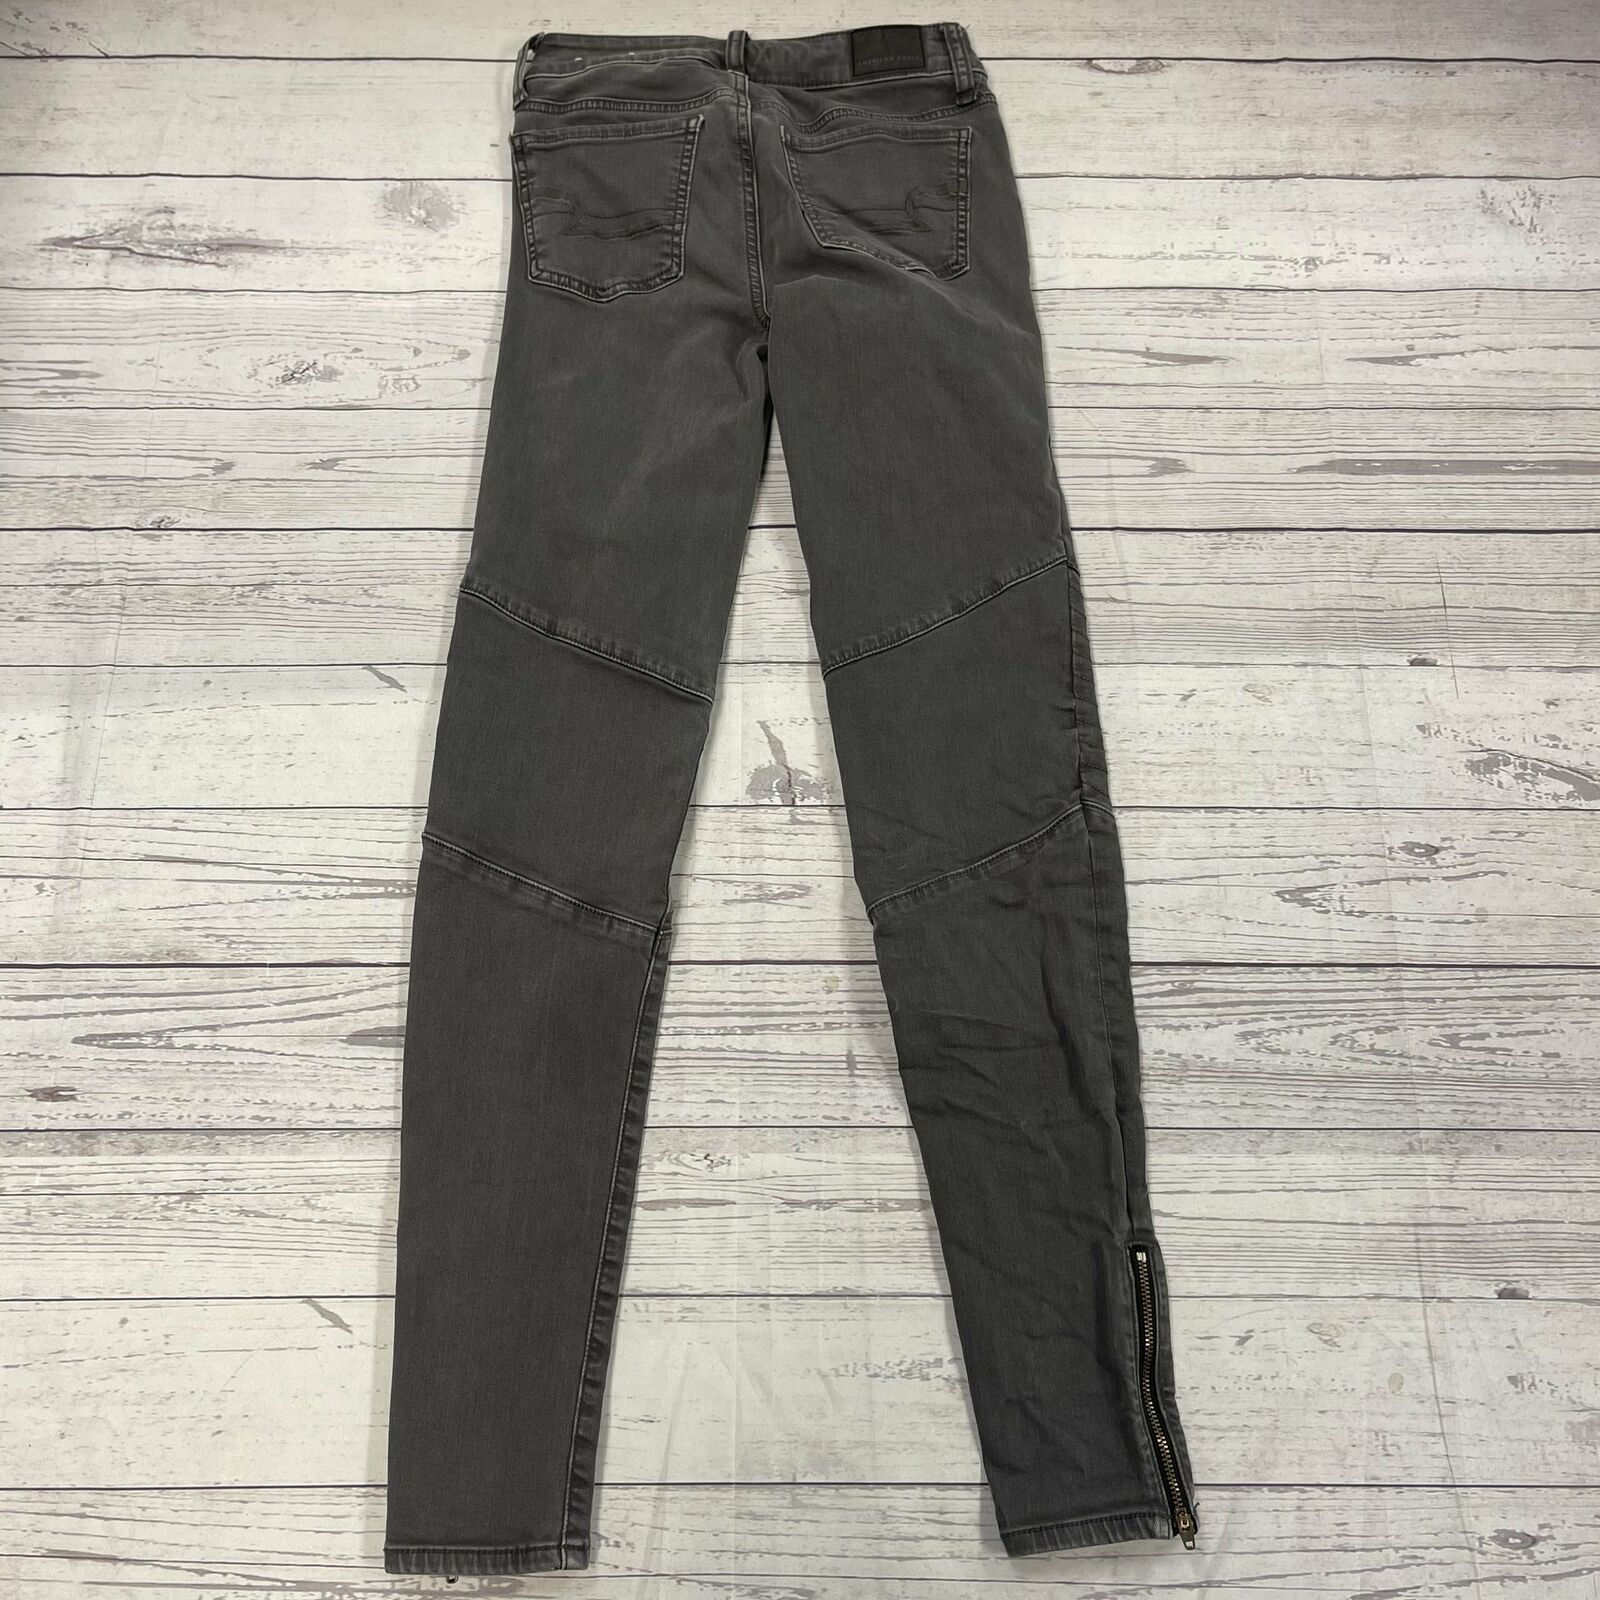 American Eagle AEO Black Moto Jeans With Zipper on Ankles Women's